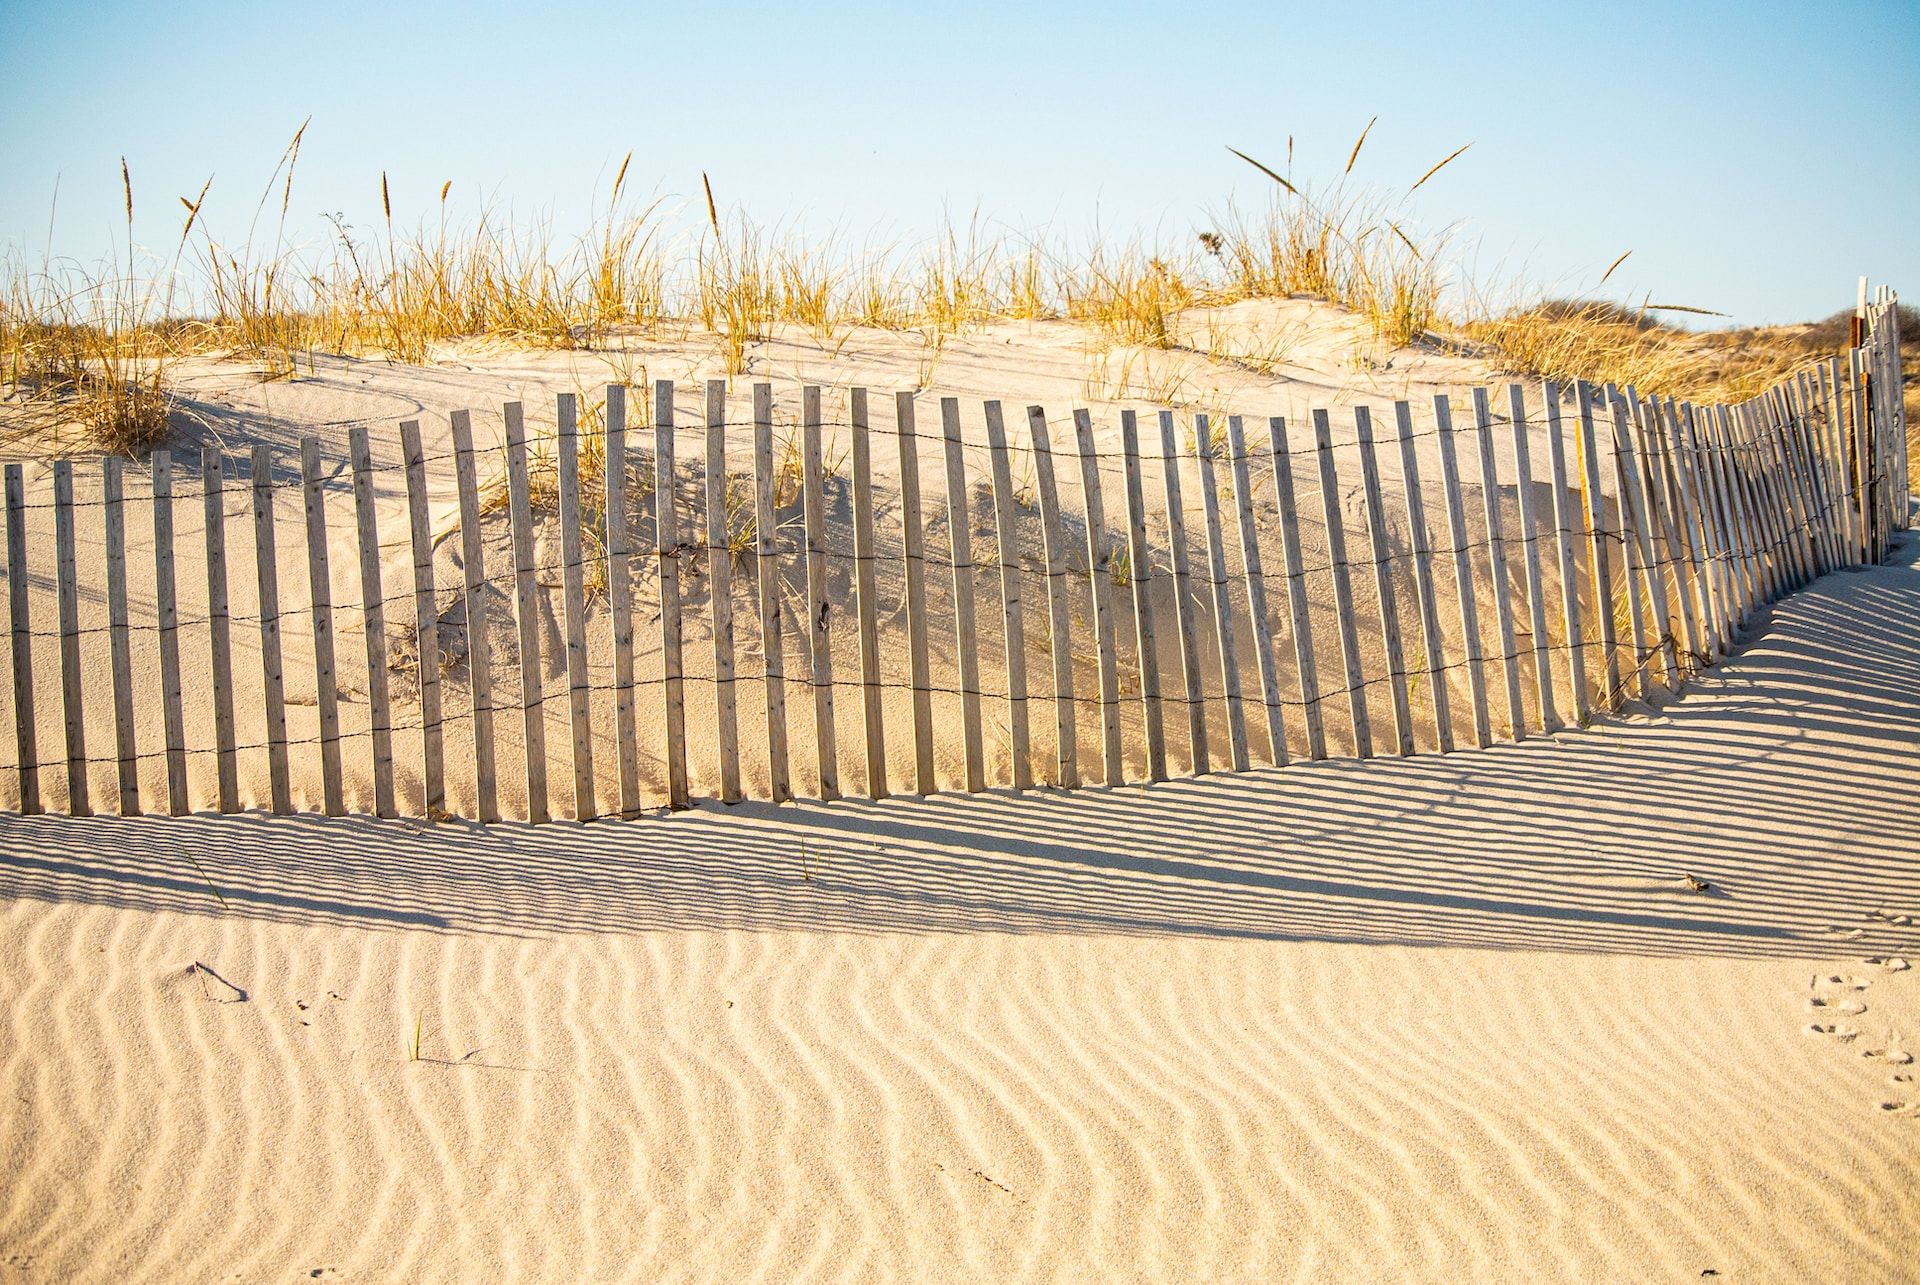 A fence along the sand dunes in Southampton